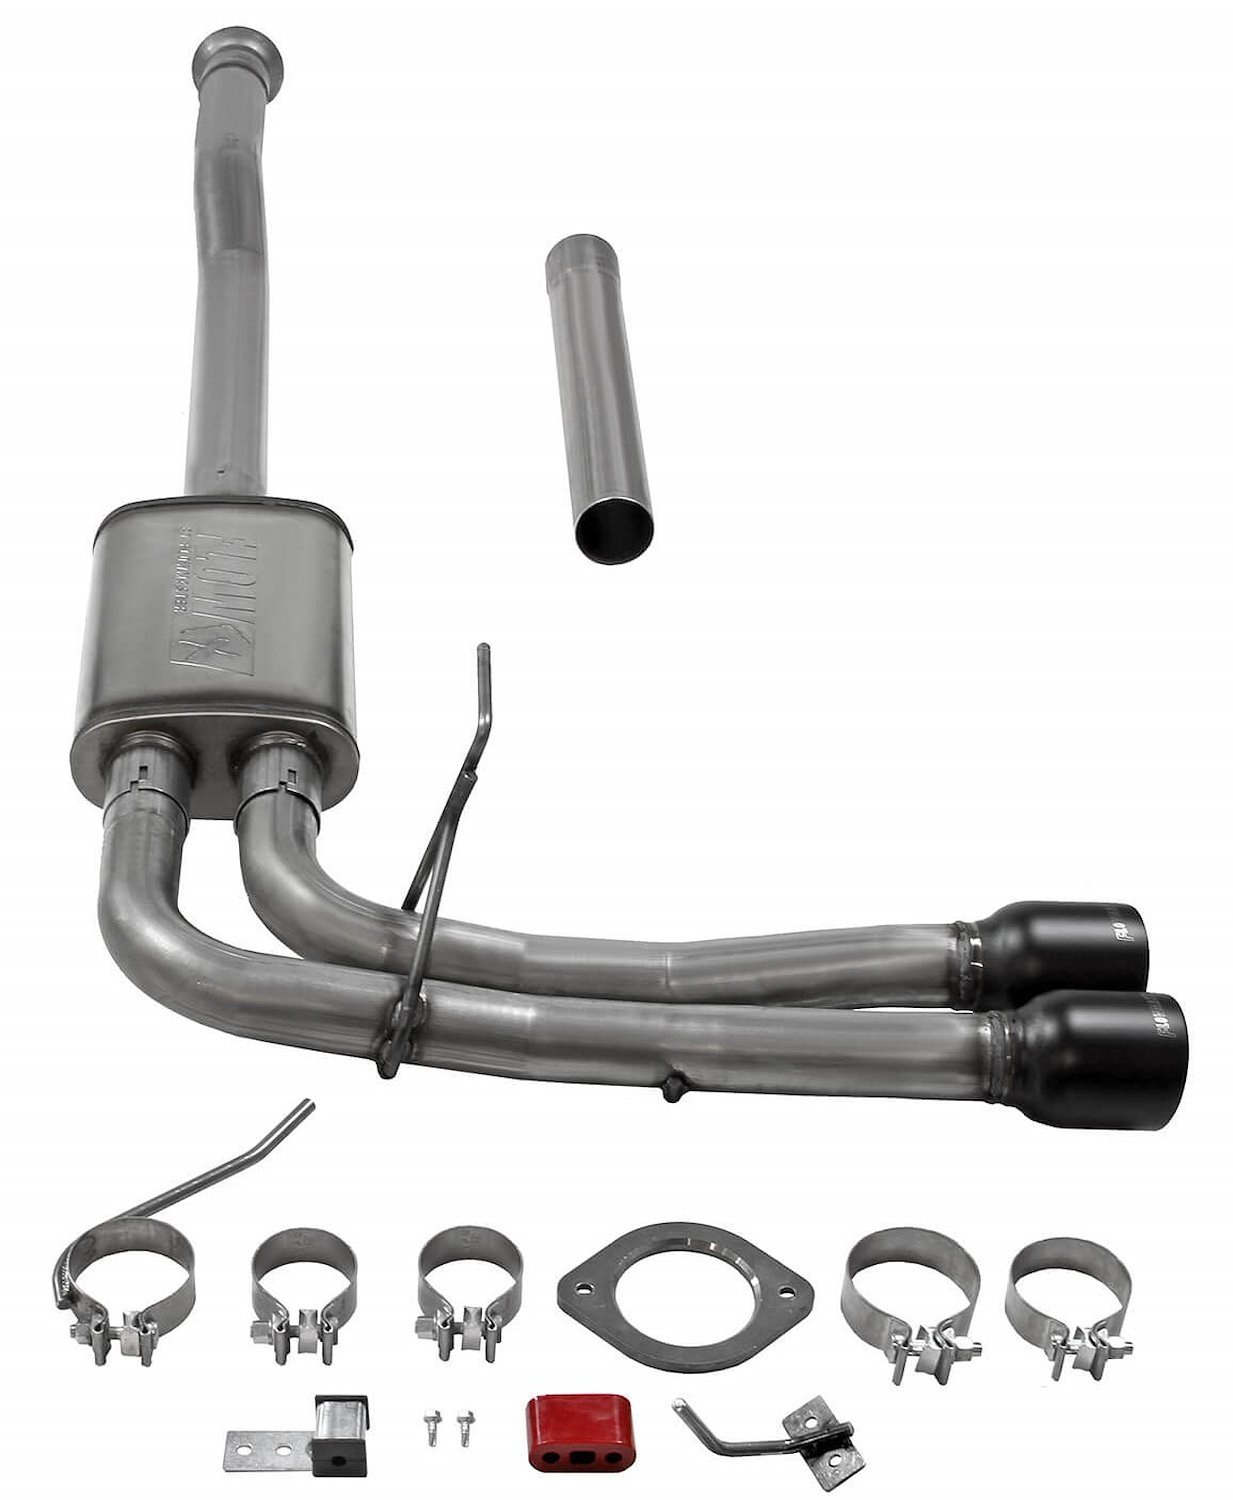 FlowFX Cat-Back (Dual-Side Exit) Exhaust System for Select Late-Model Ford F-150 Pickup Trucks (All Cabs)